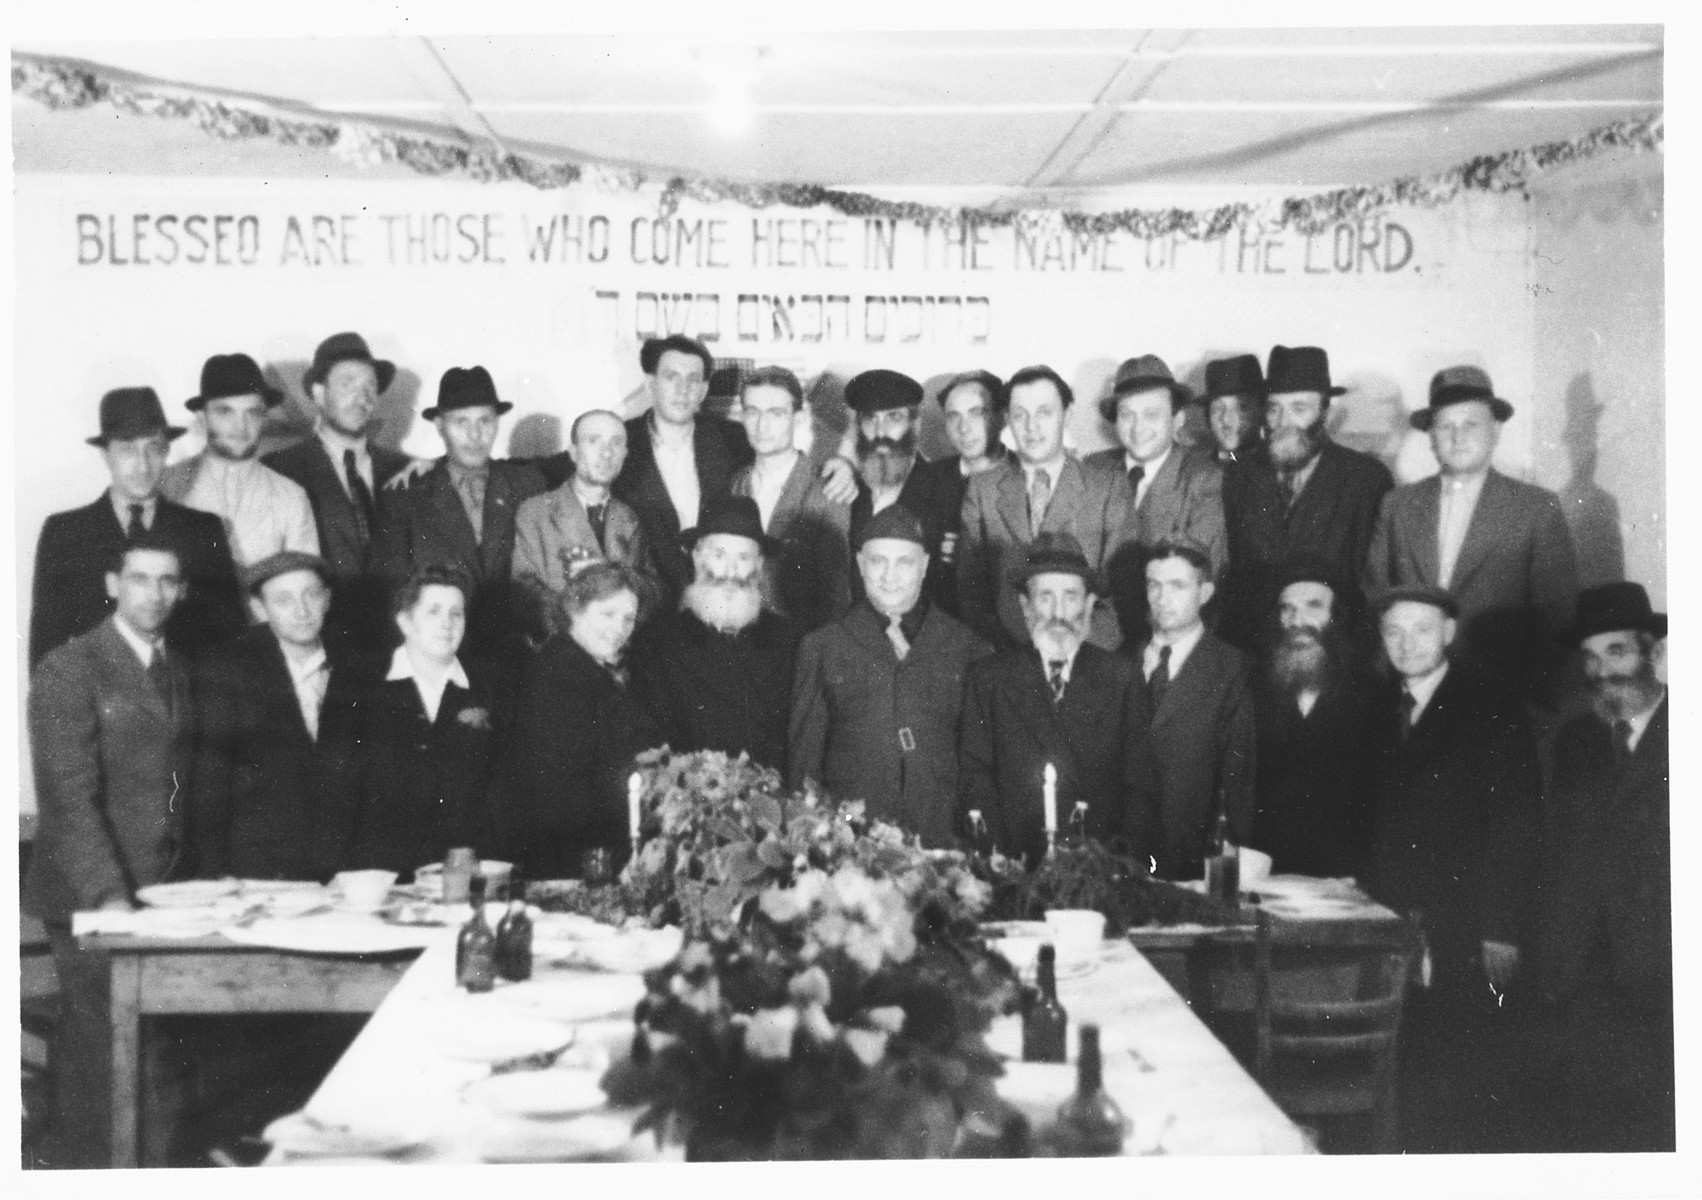 UNRRA camp director Harold Fishbein poses with a group of religious Jews at a holiday celebration in the Schlachtensee displaced persons camp.

Harold Fishbein is standing in the front row center, between the two bearded men.  Also pictured is Benjamin Holzer in the first row, on the far left.